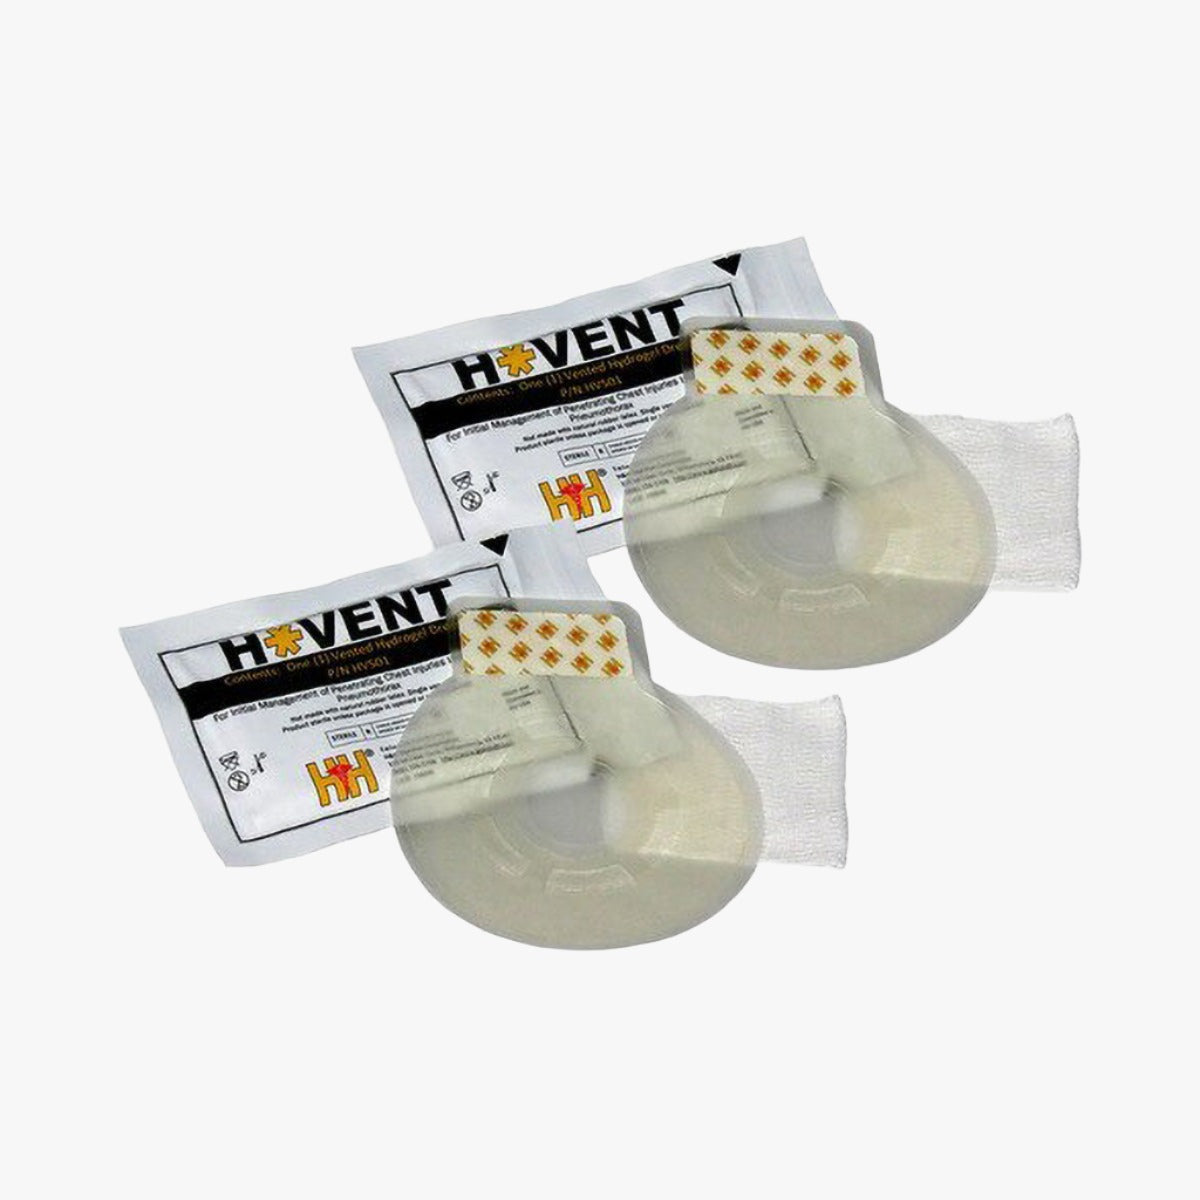 H&H Hyvent Vented Chest Seal Twin Pack 23 x 21 cm